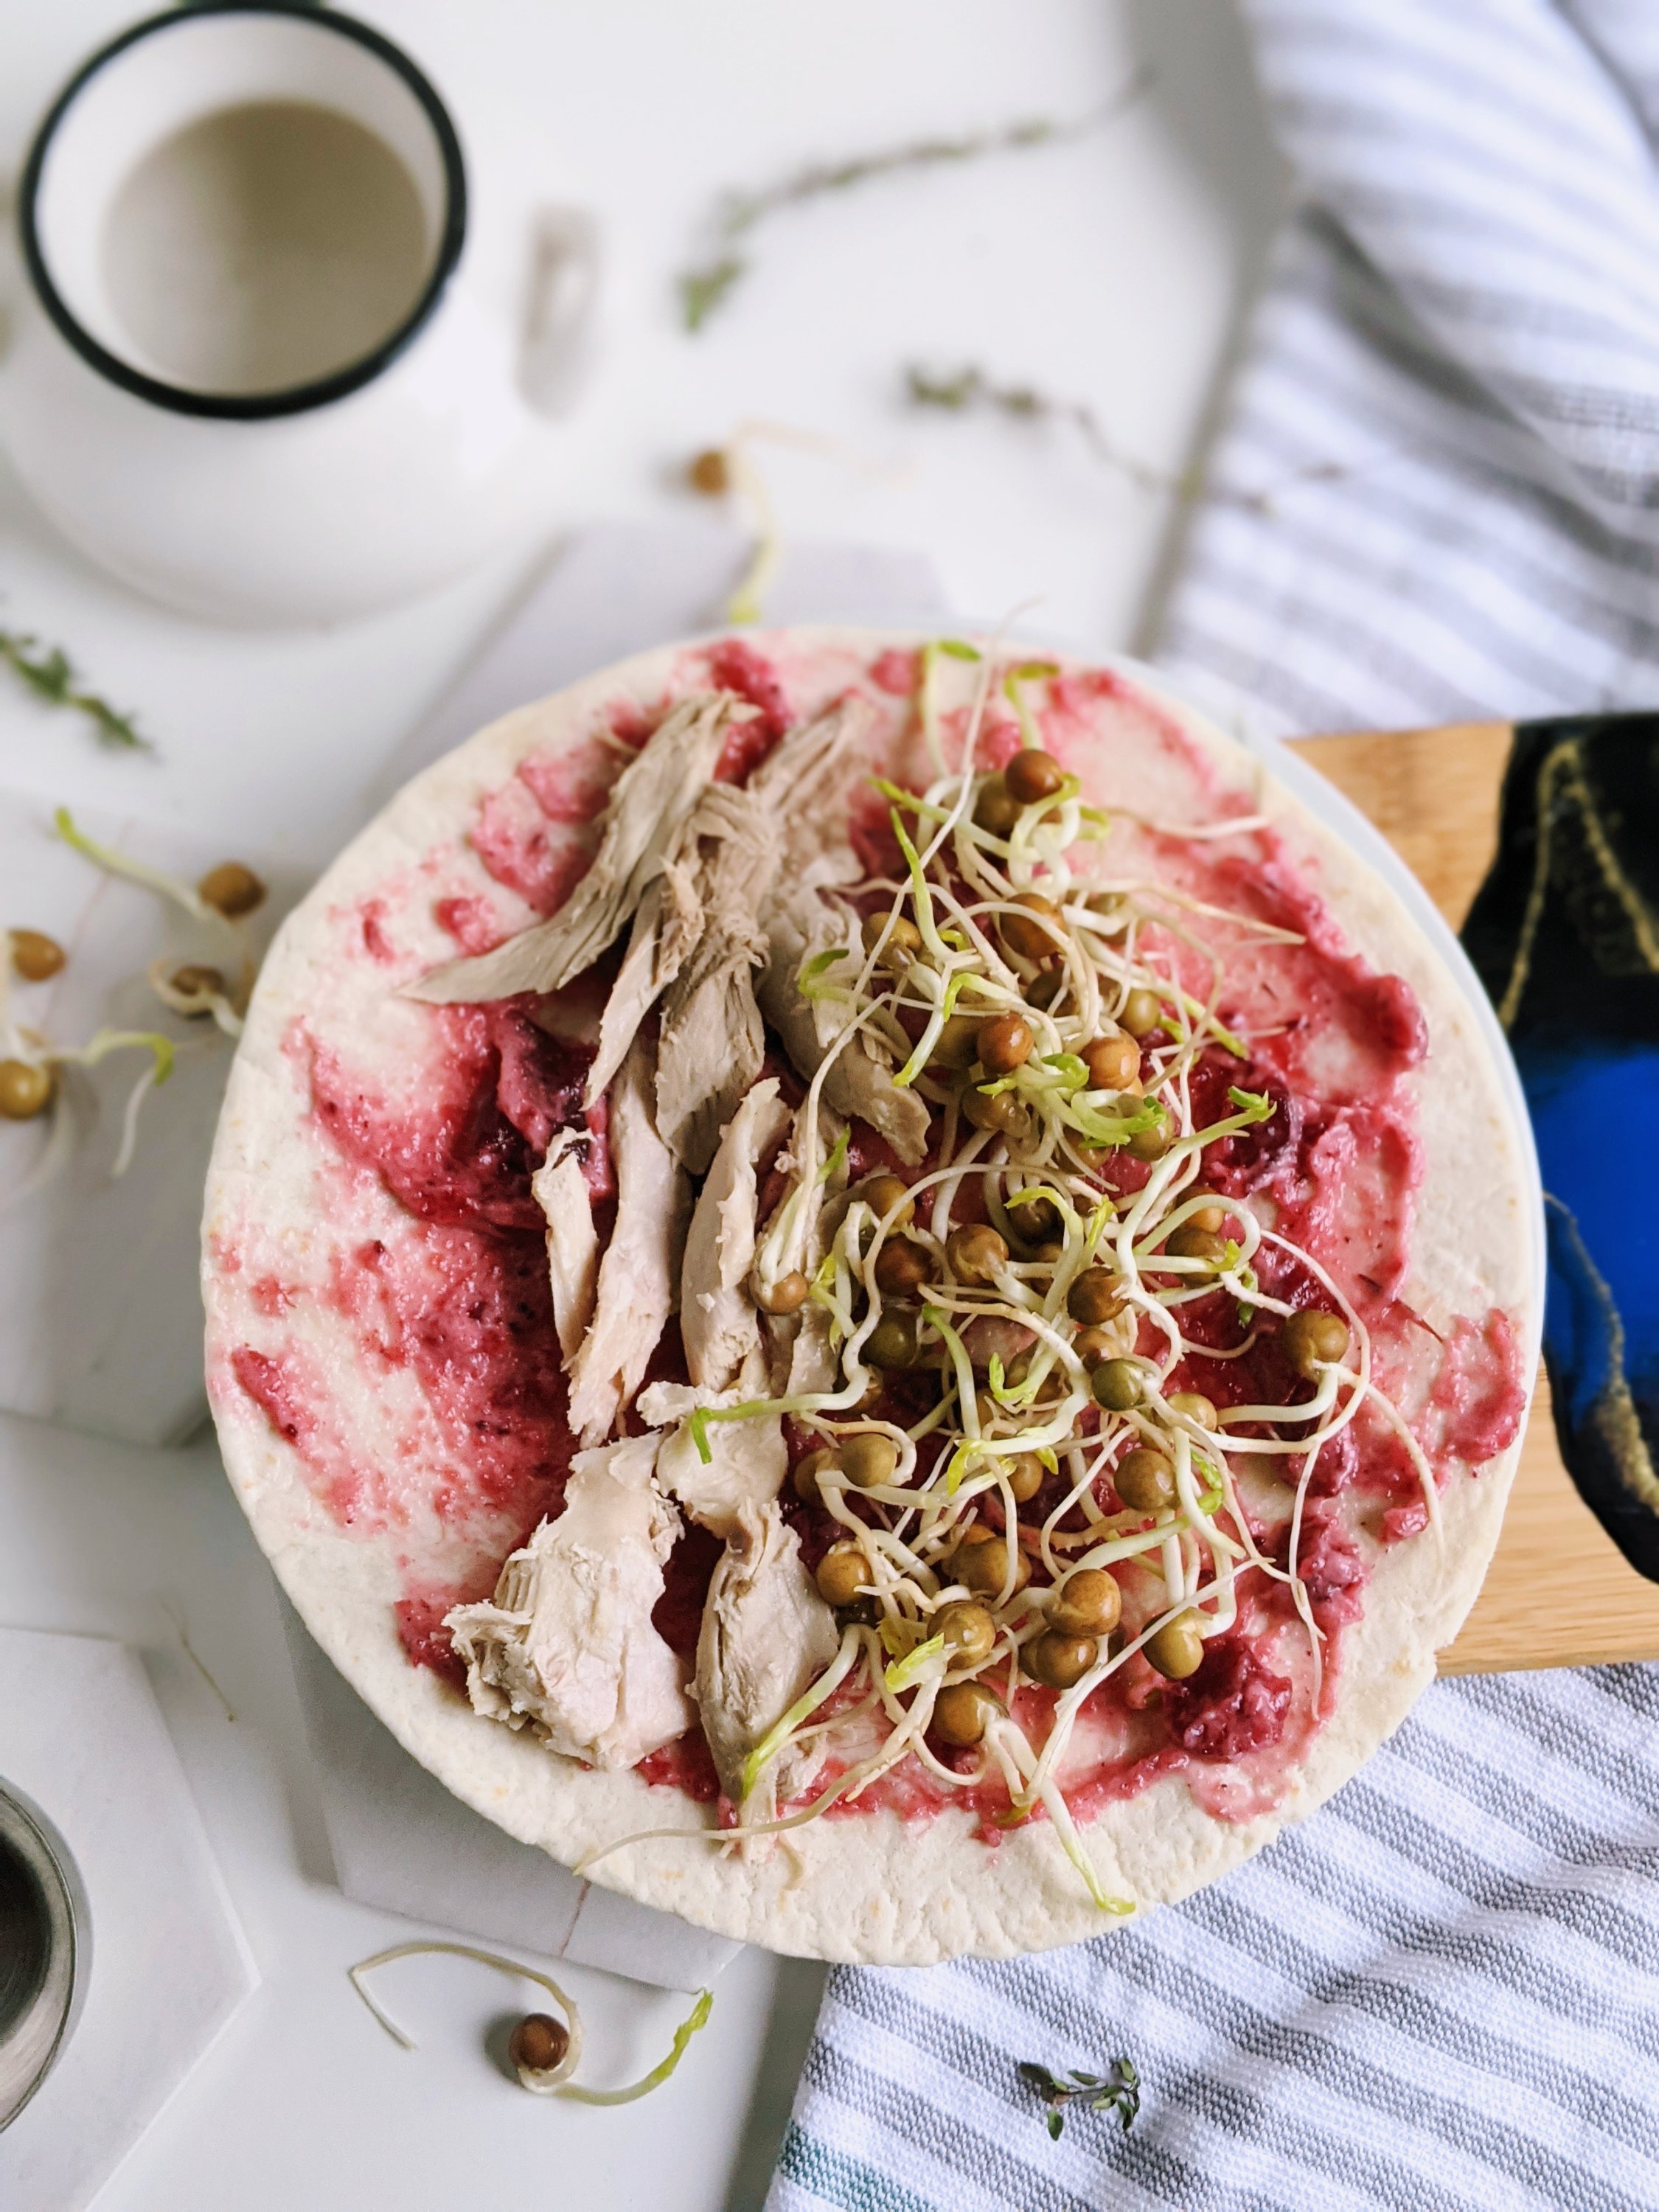 turkey wrap with cranberry mayo and sprouts recipe healthy high protein gluten free way to use thanksgiving leftovers healthy lunches